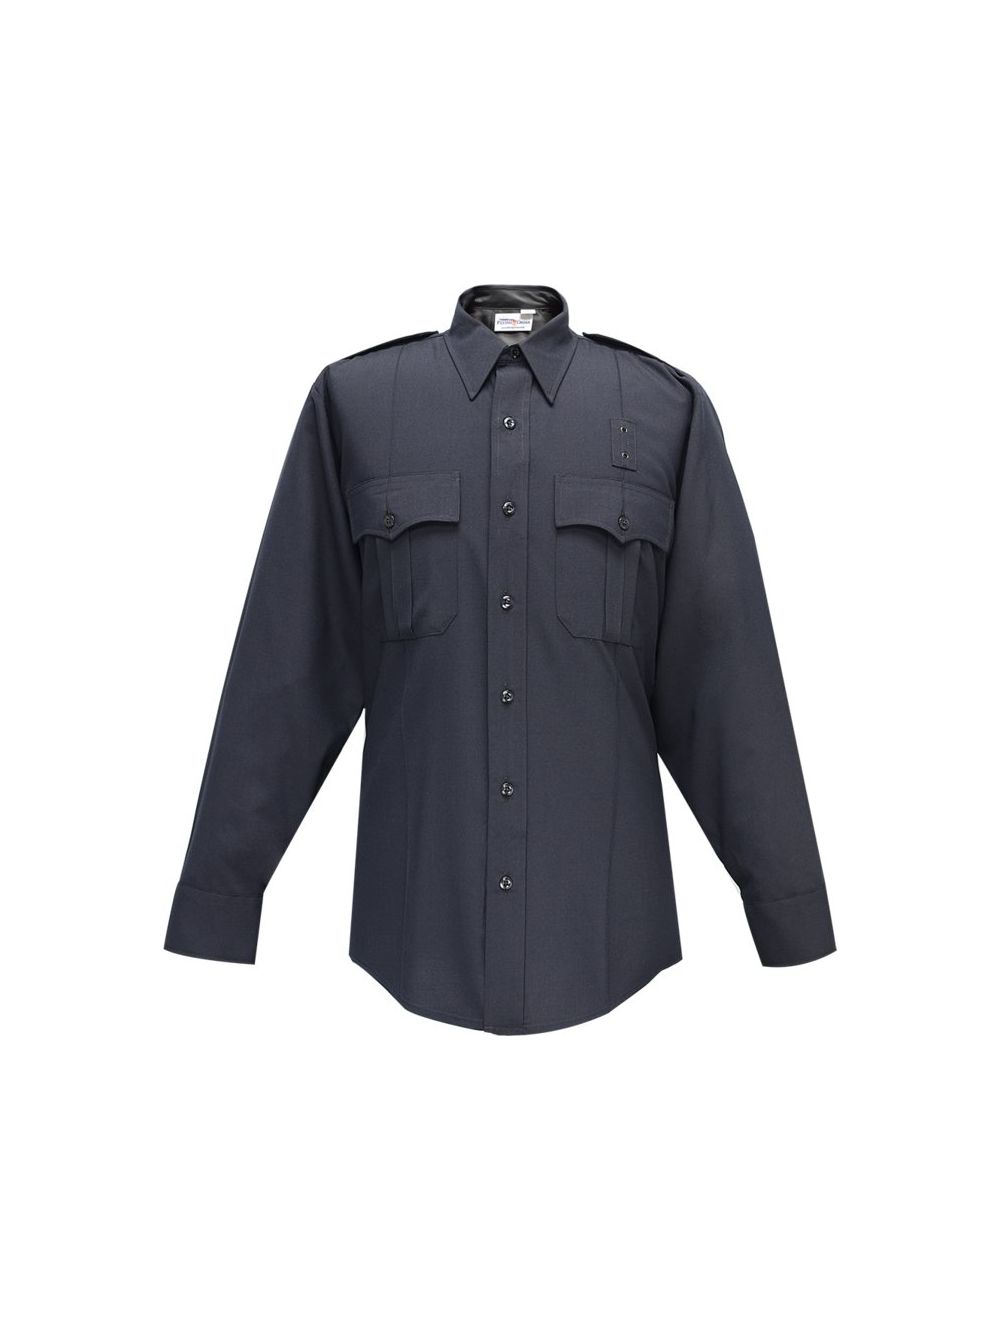 Flying Cross Justice Long Sleeve Uniform Shirt with Pleated Pockets - LAPD Navy 07W84 - Newest Products